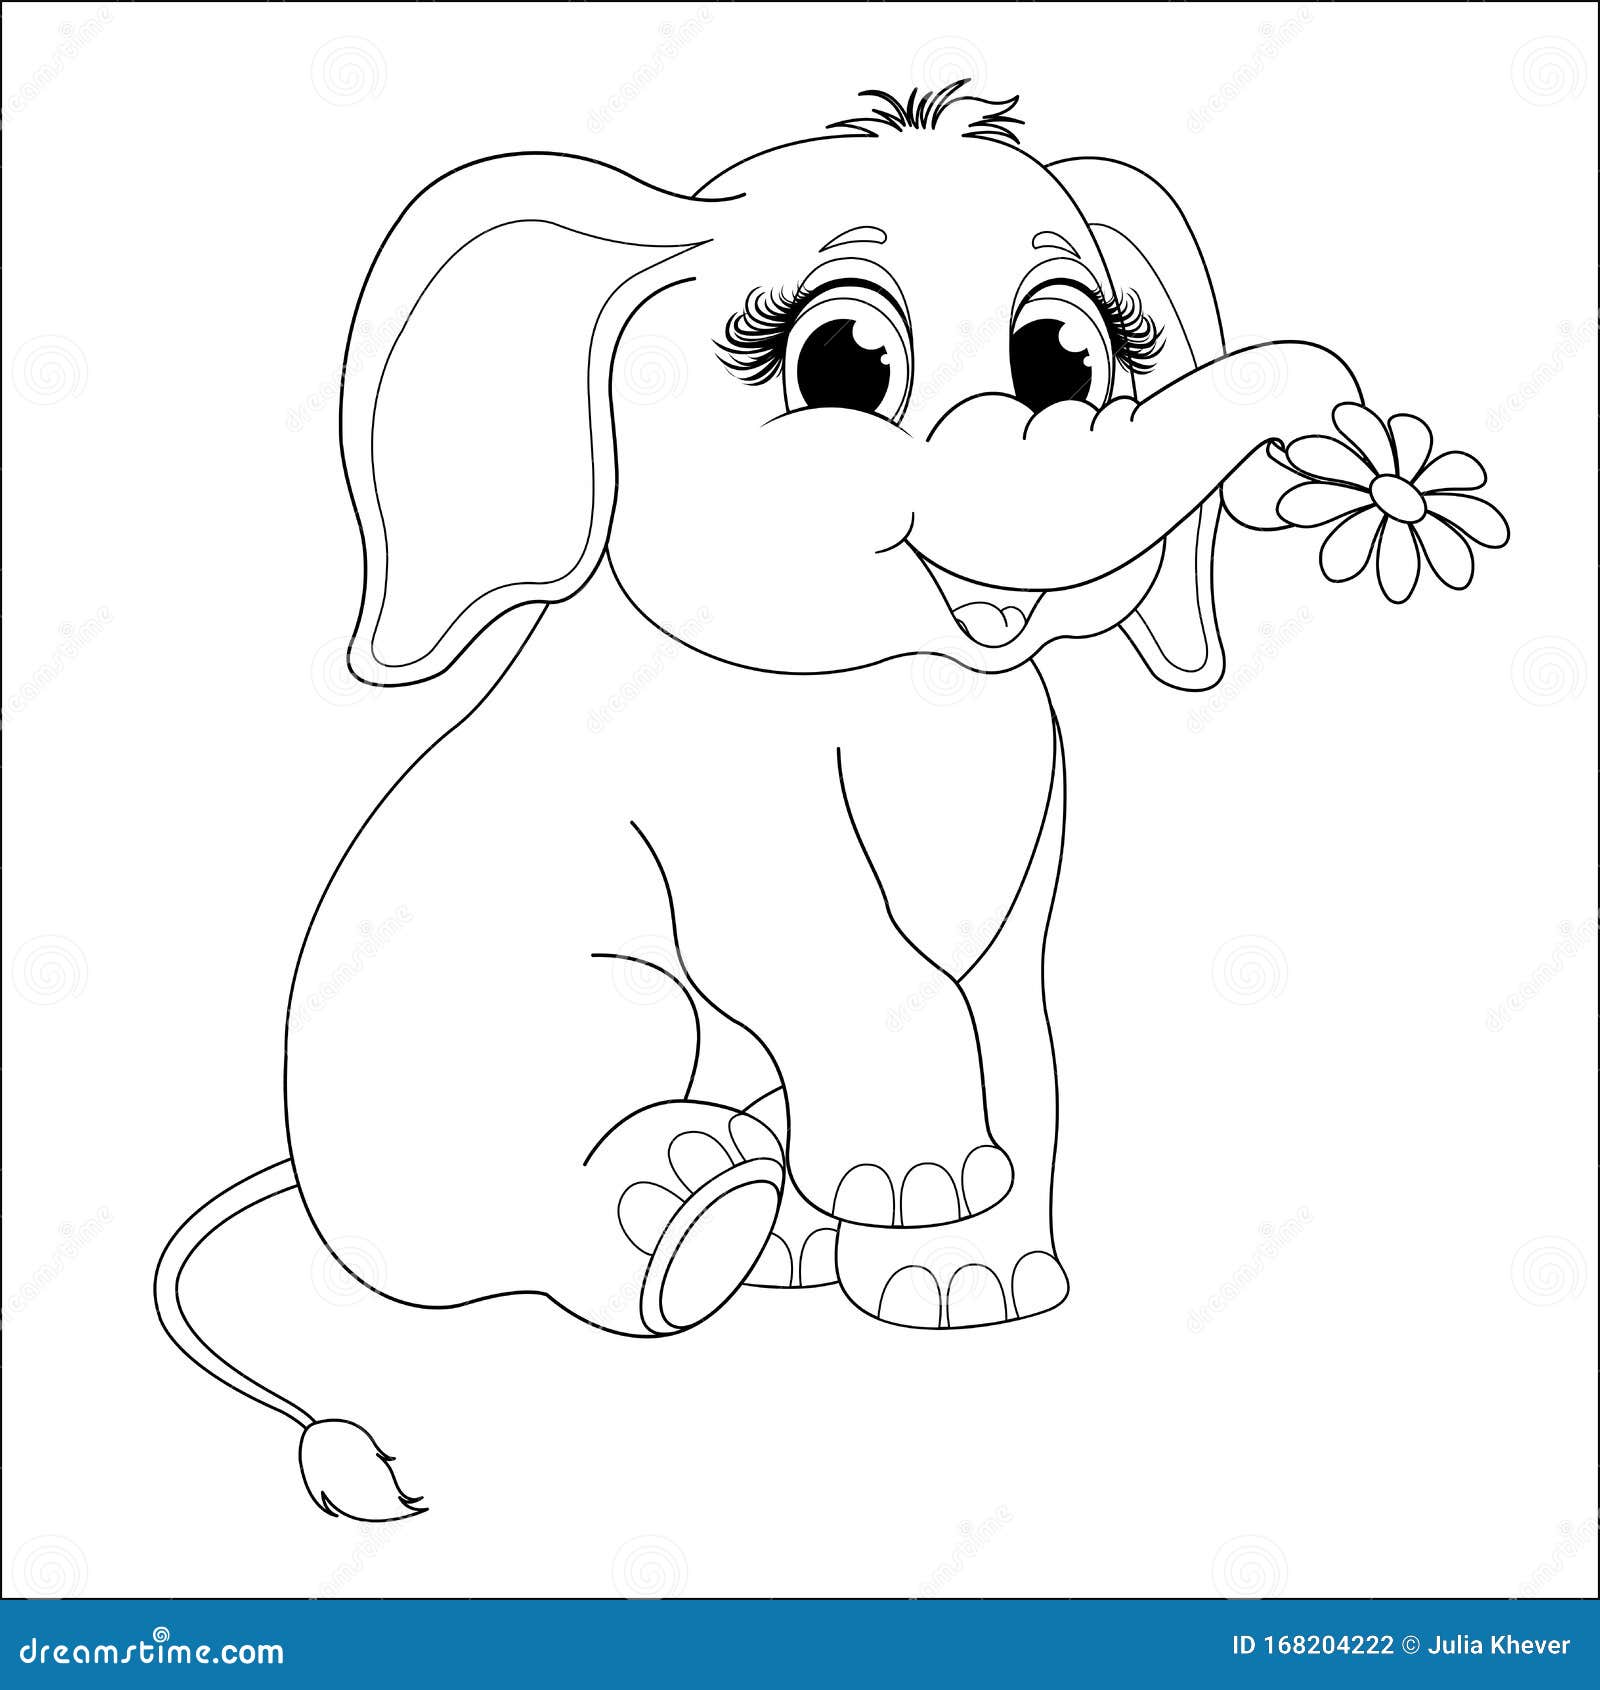 Coloring Page for Kids with Funny Cartoon Elephant. Stock Vector ...